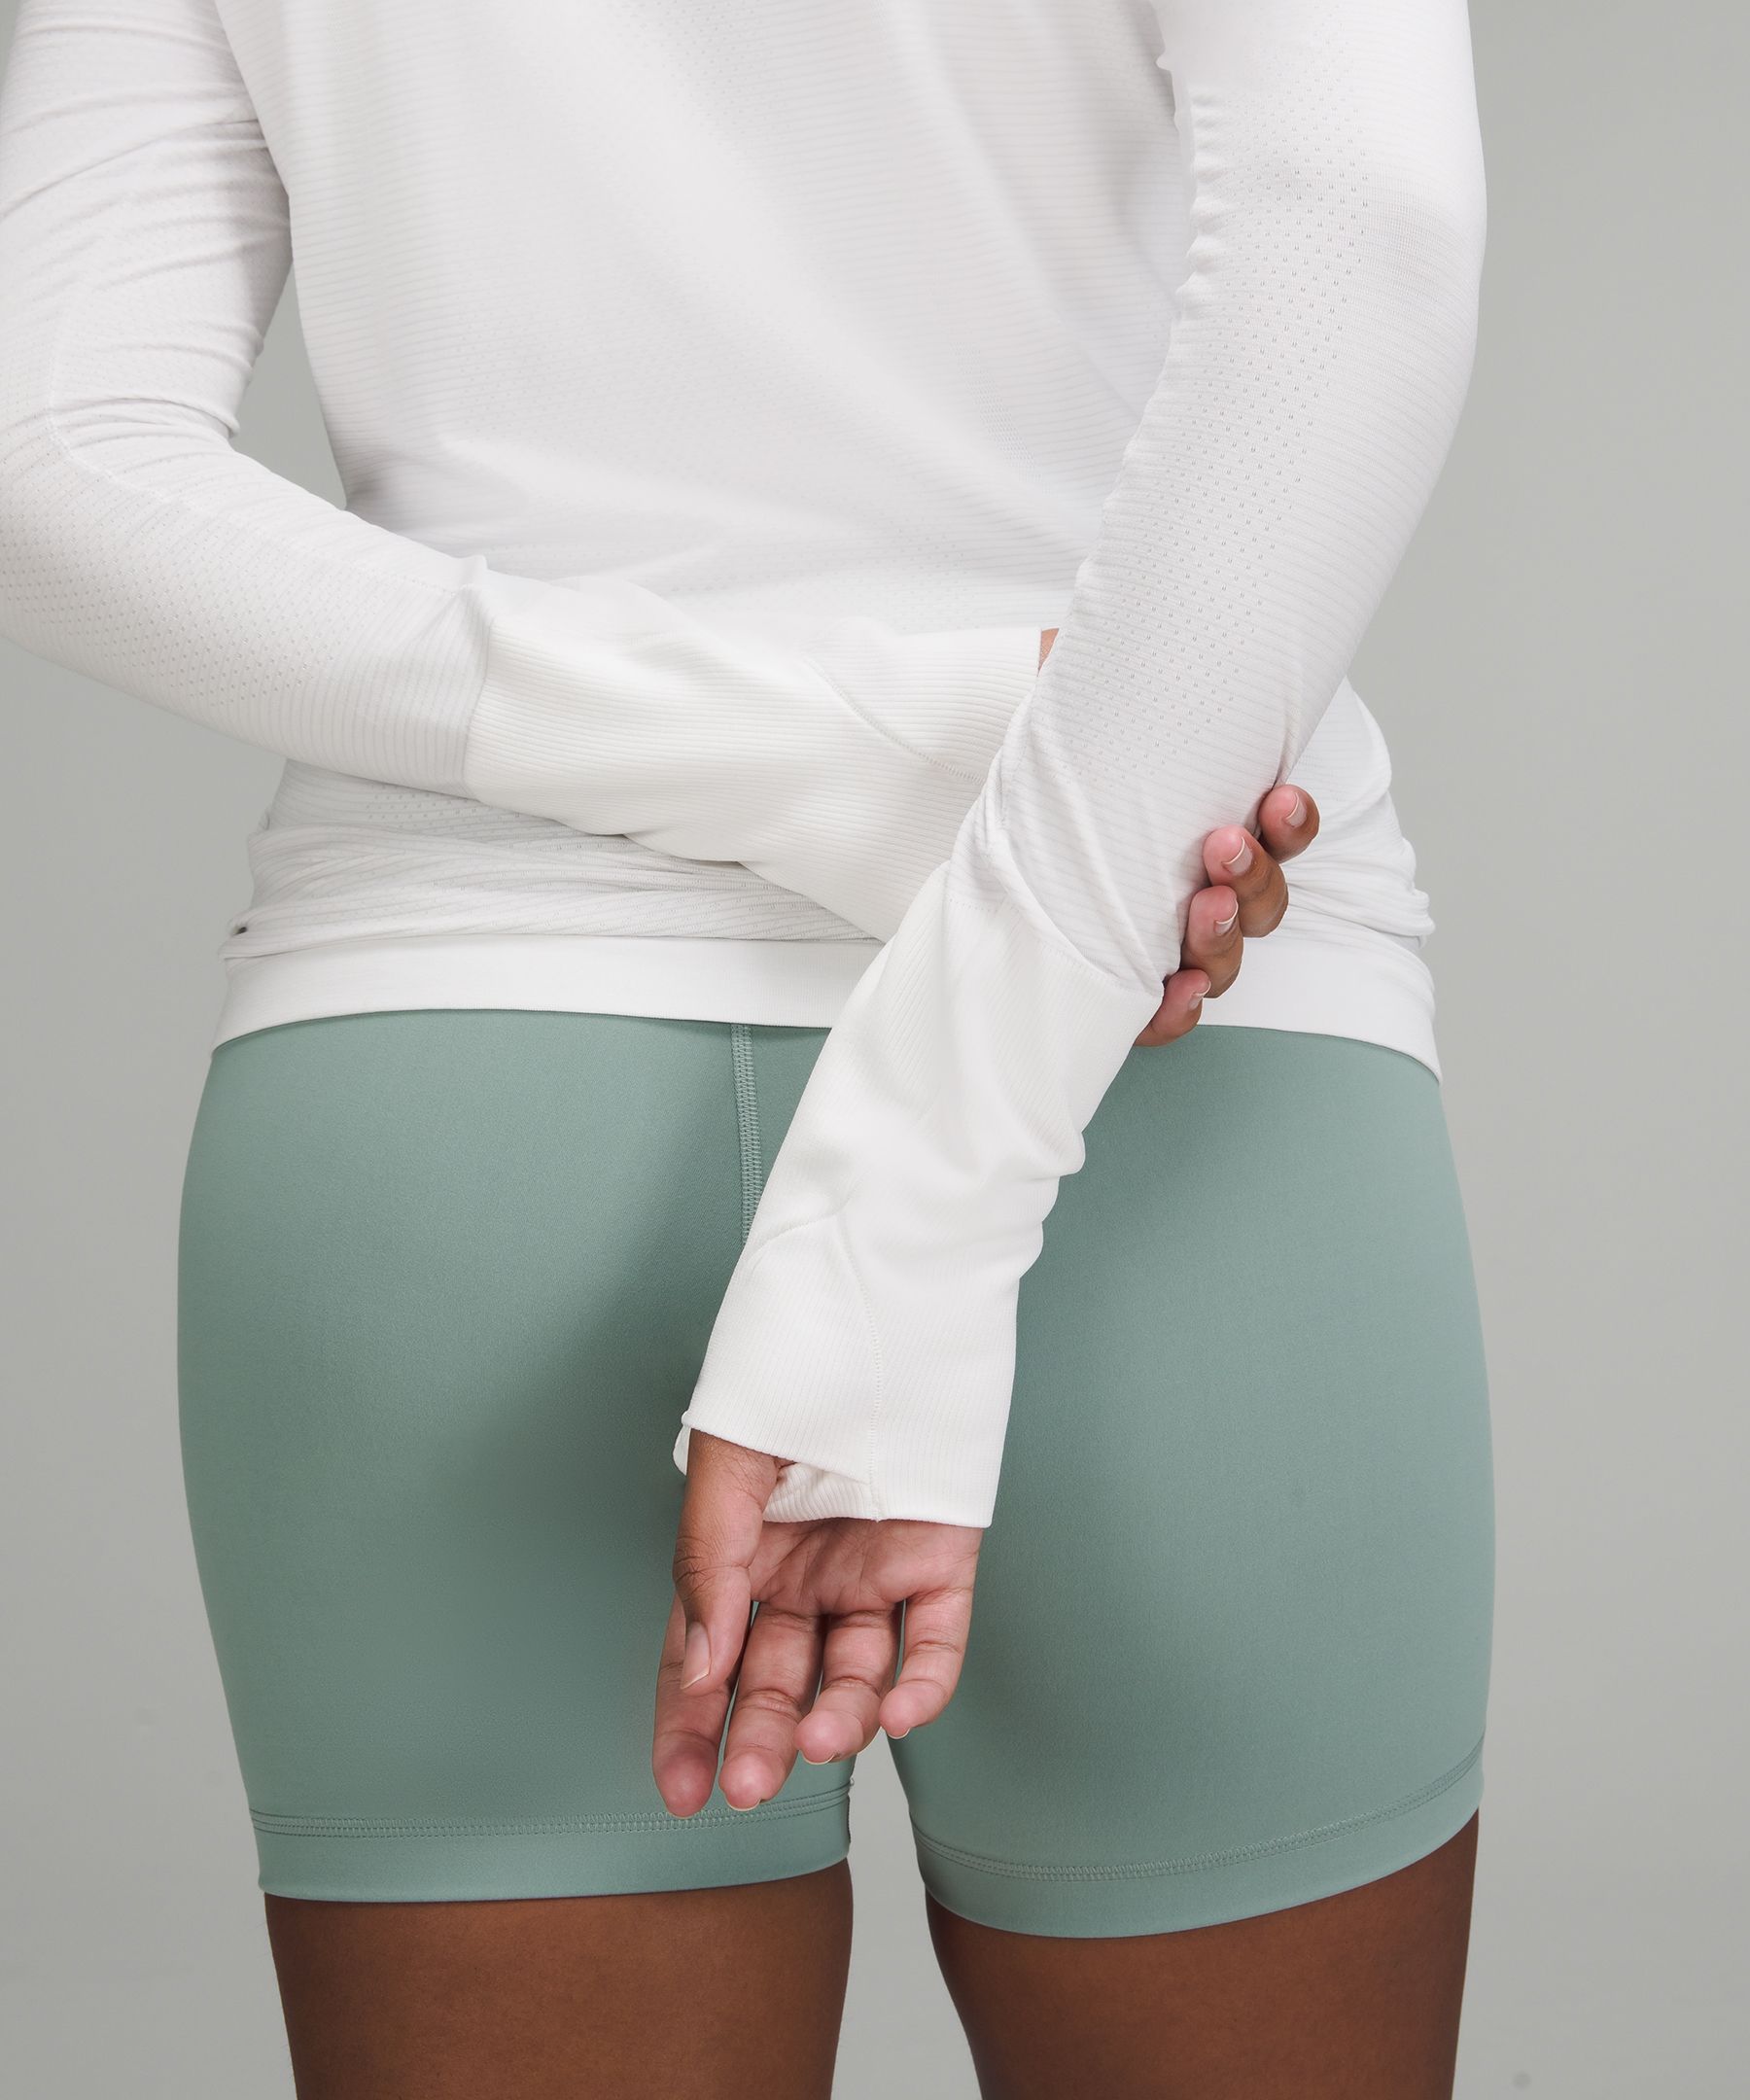 Lululemon Pastel Blue Long Sleeve Swiftly Tech Size 6 - $35 (53% Off  Retail) - From Abbi